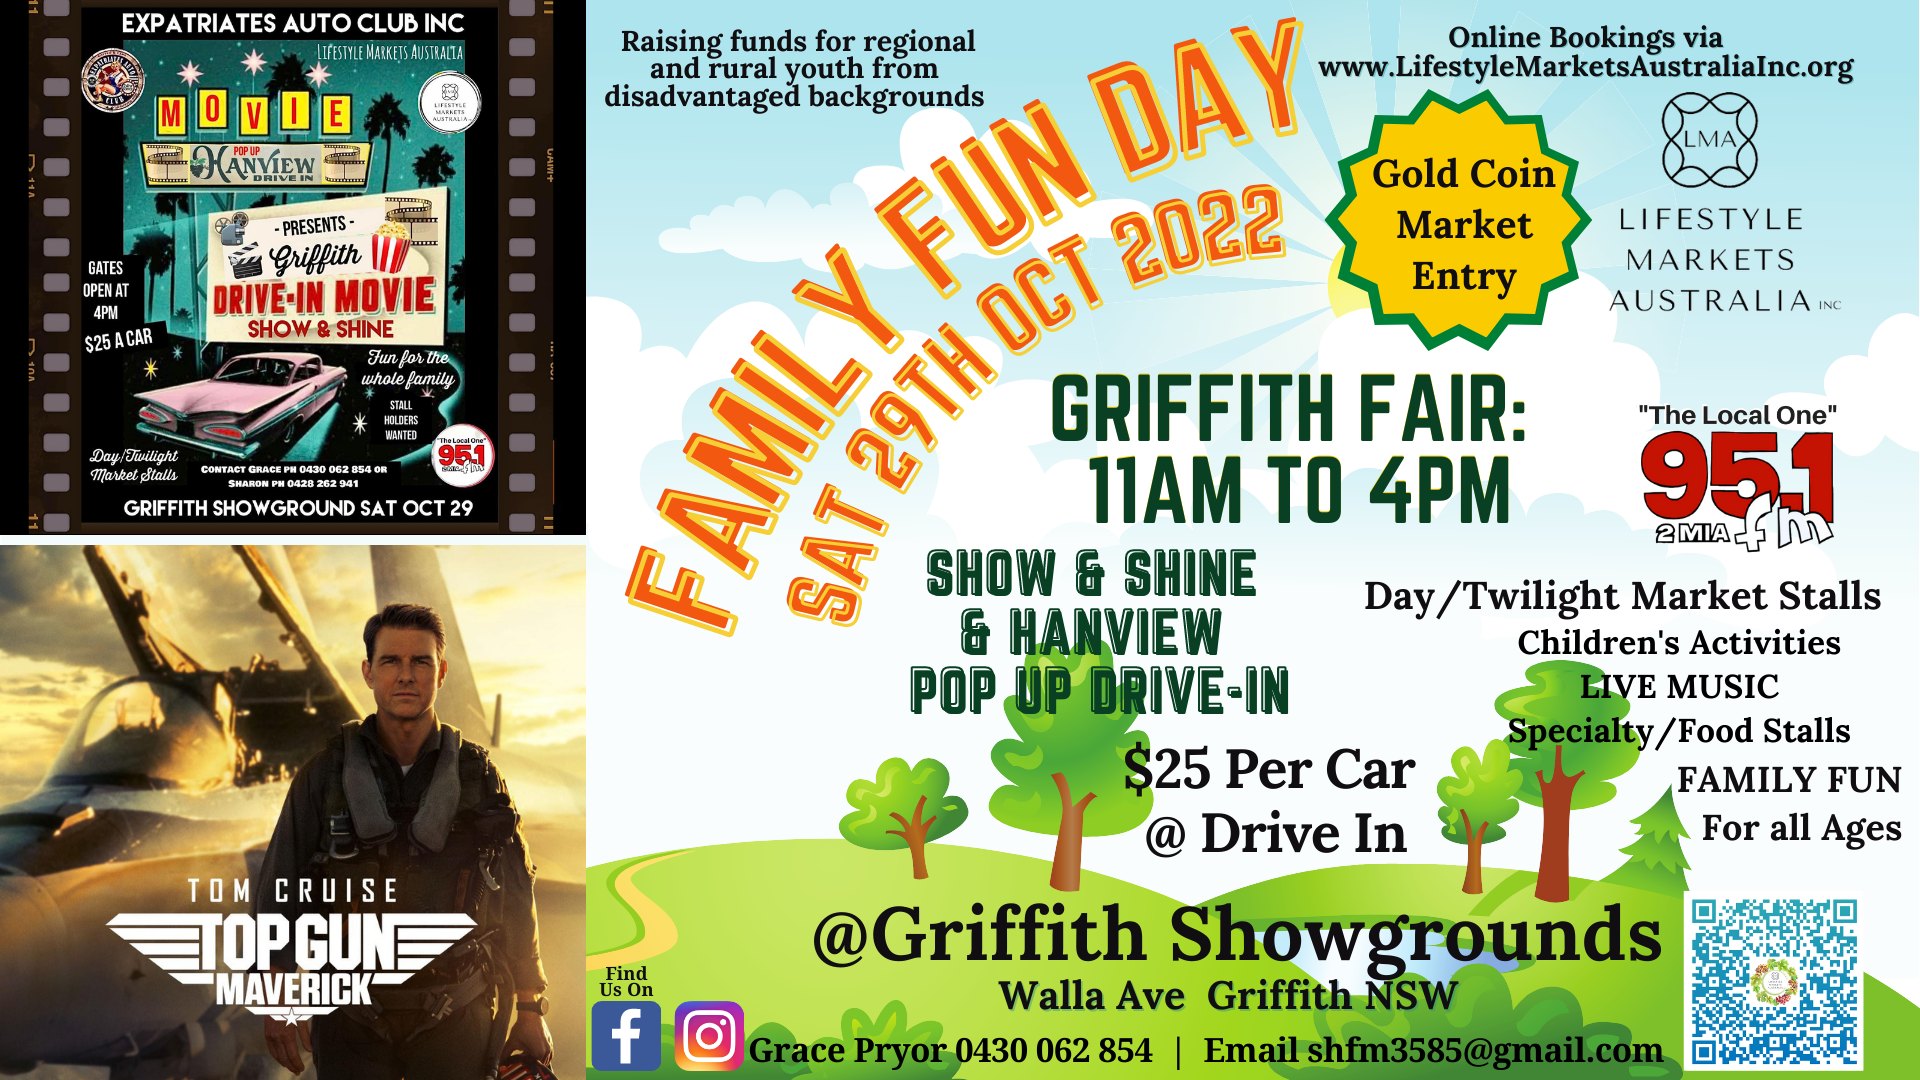 POSTPONED!!! (NEW DATE 3 DECEMBER 2022) Hanview Pop Up Drive In - Griffith Fair